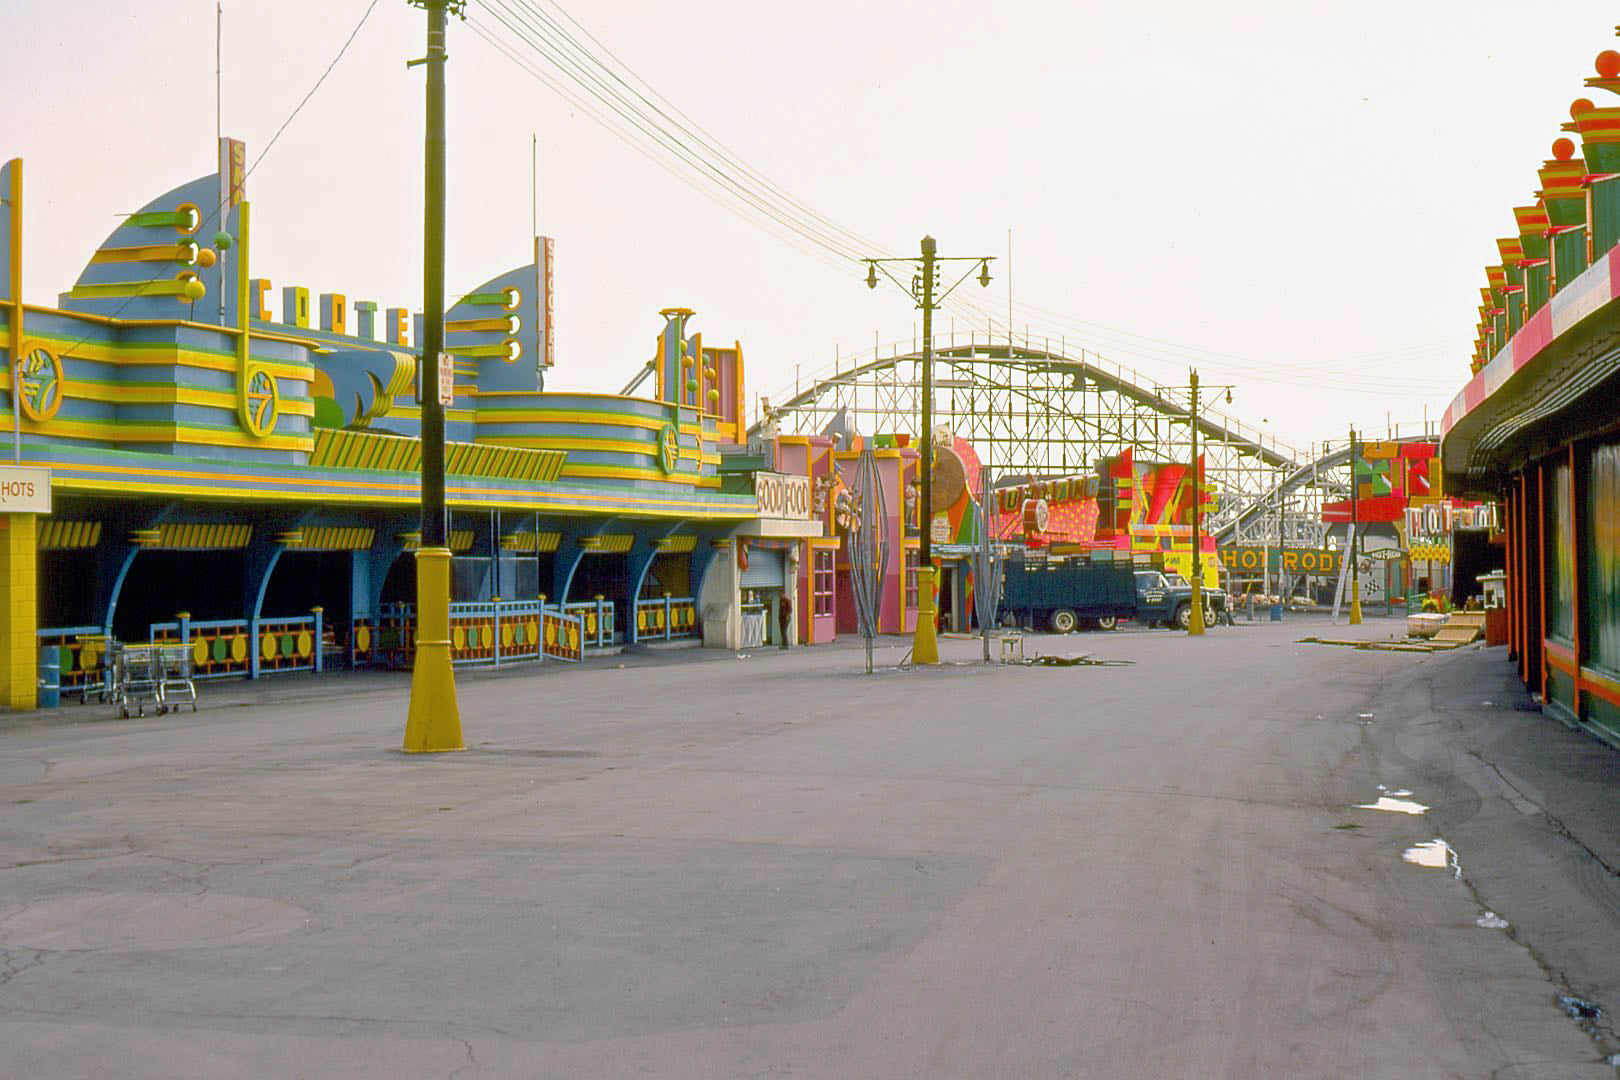 Games along a very quiet CNE Midway, 1968